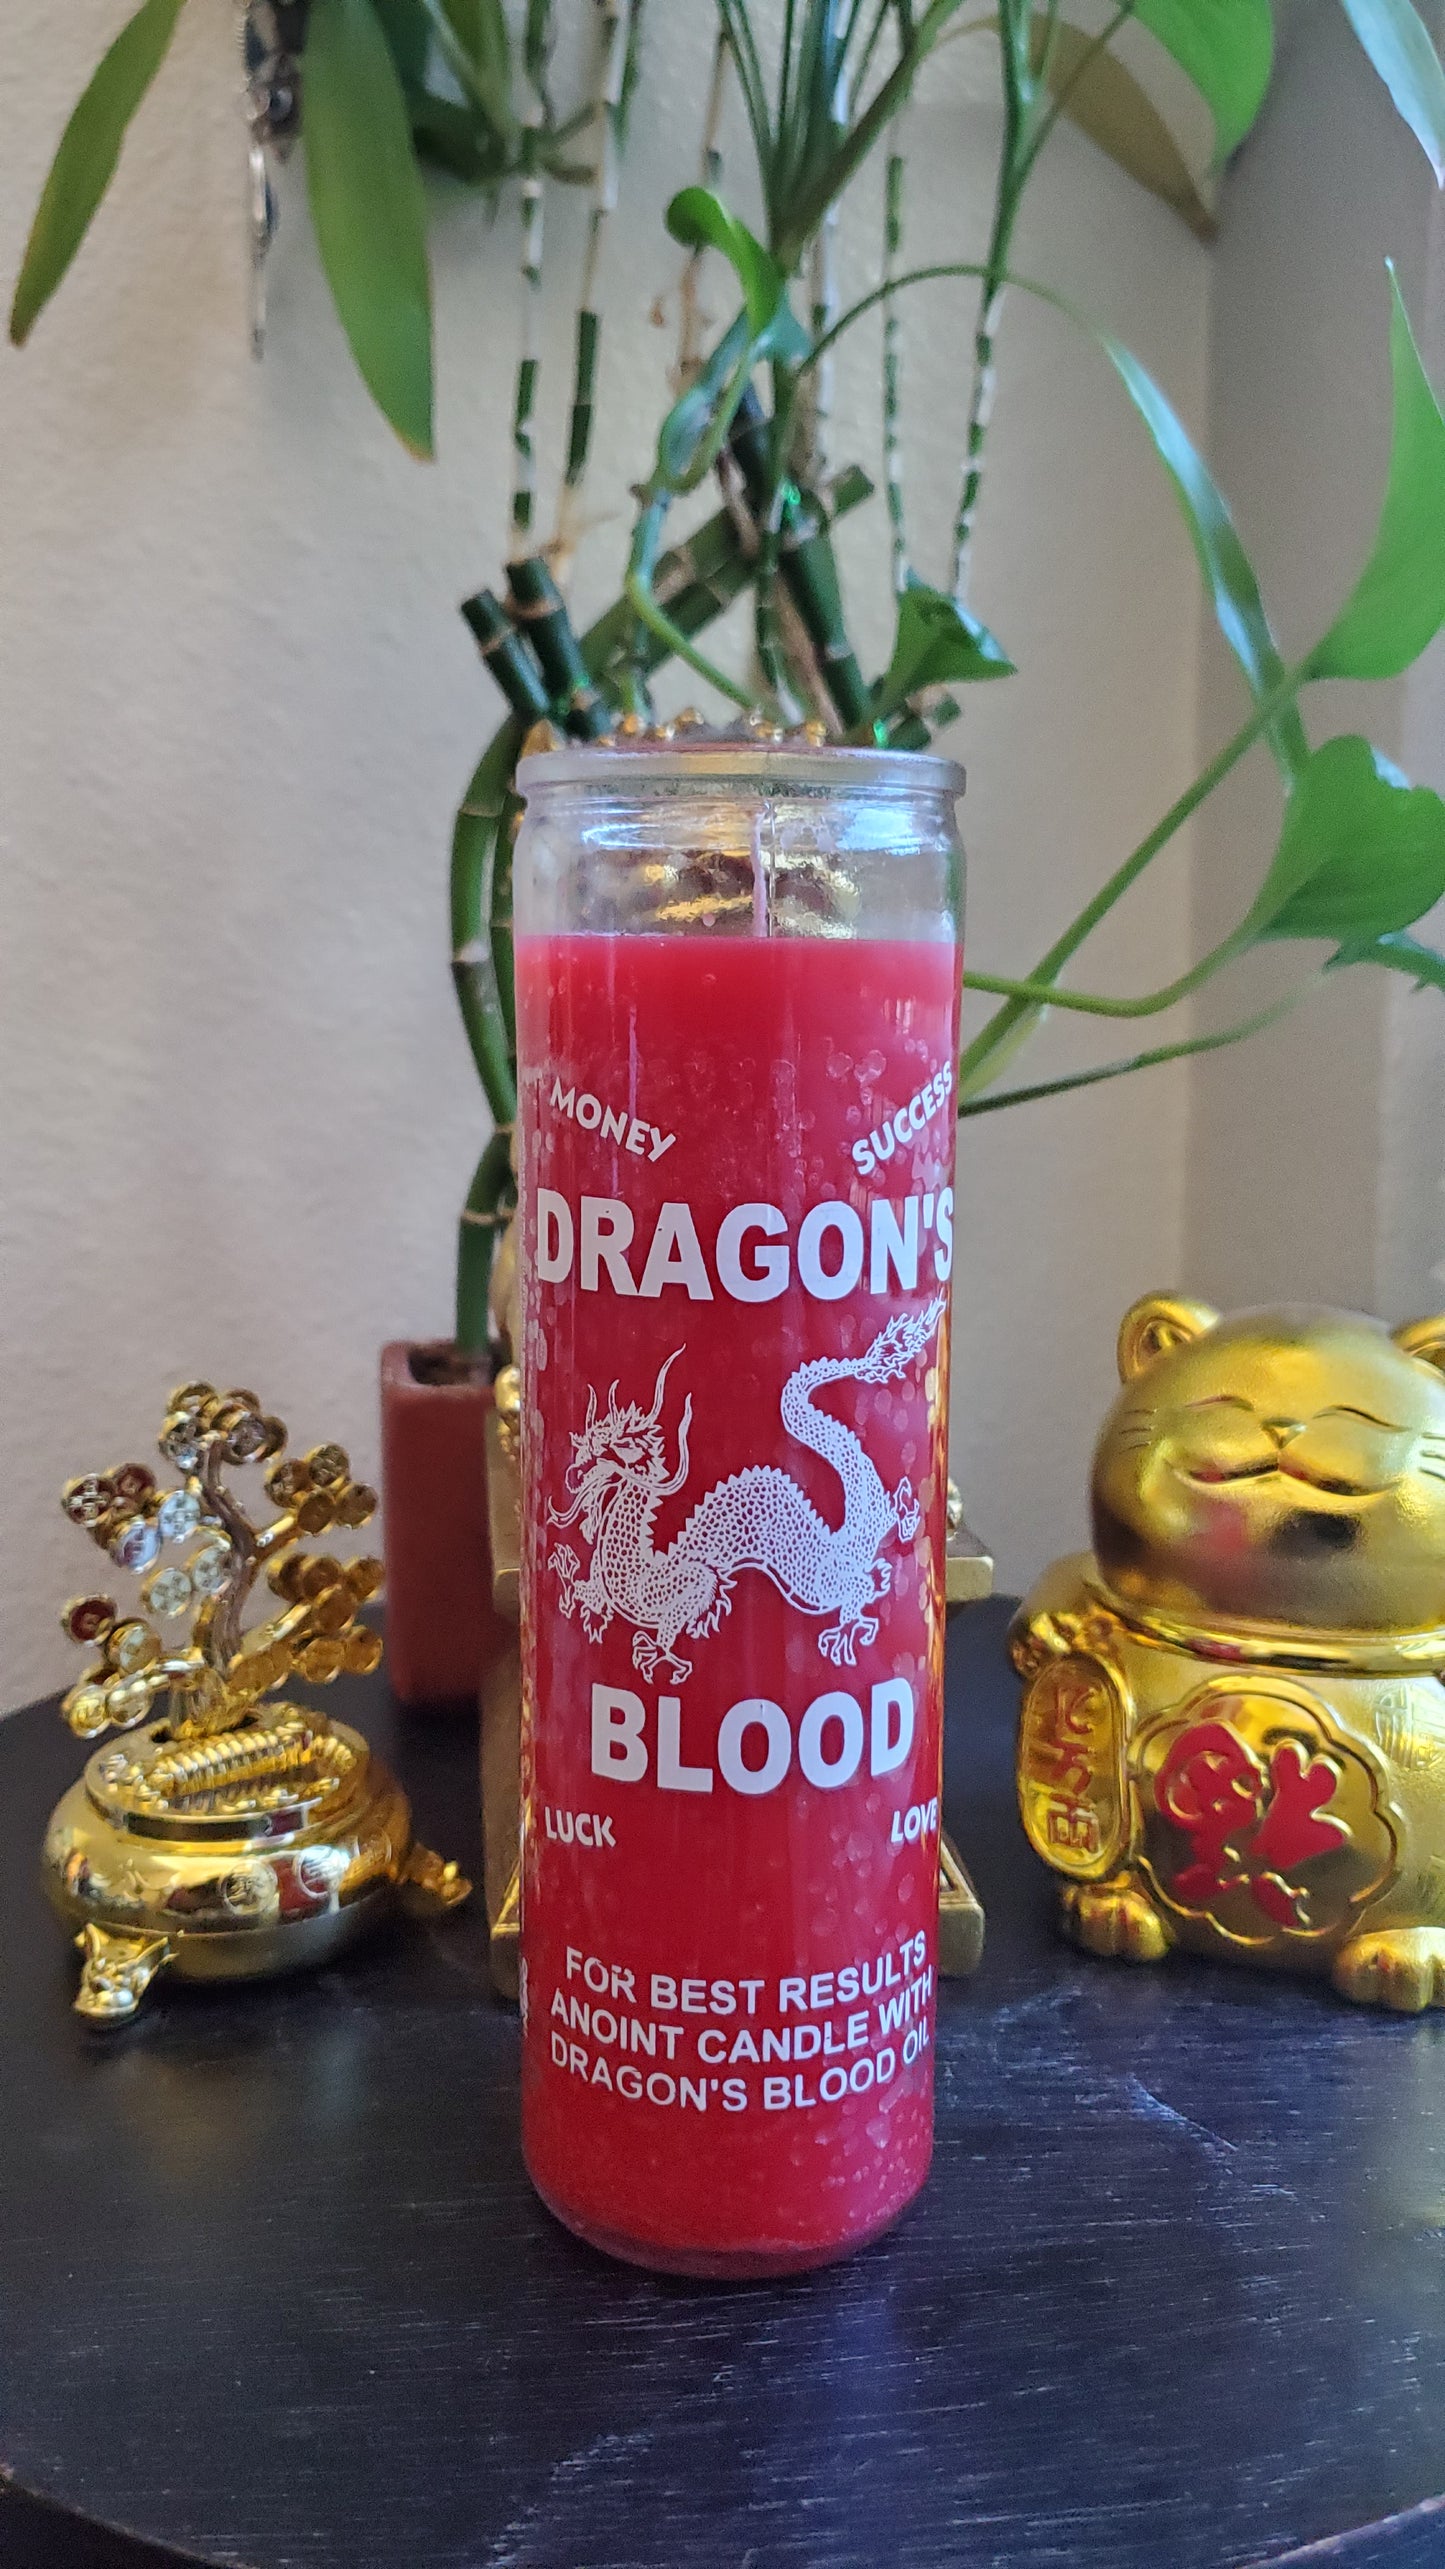 Dragons Blood 7 Day Luck Candle** #SpellCandle #RootWork #conjure #MoneyMagick #LuckDrawing #AltarMagick